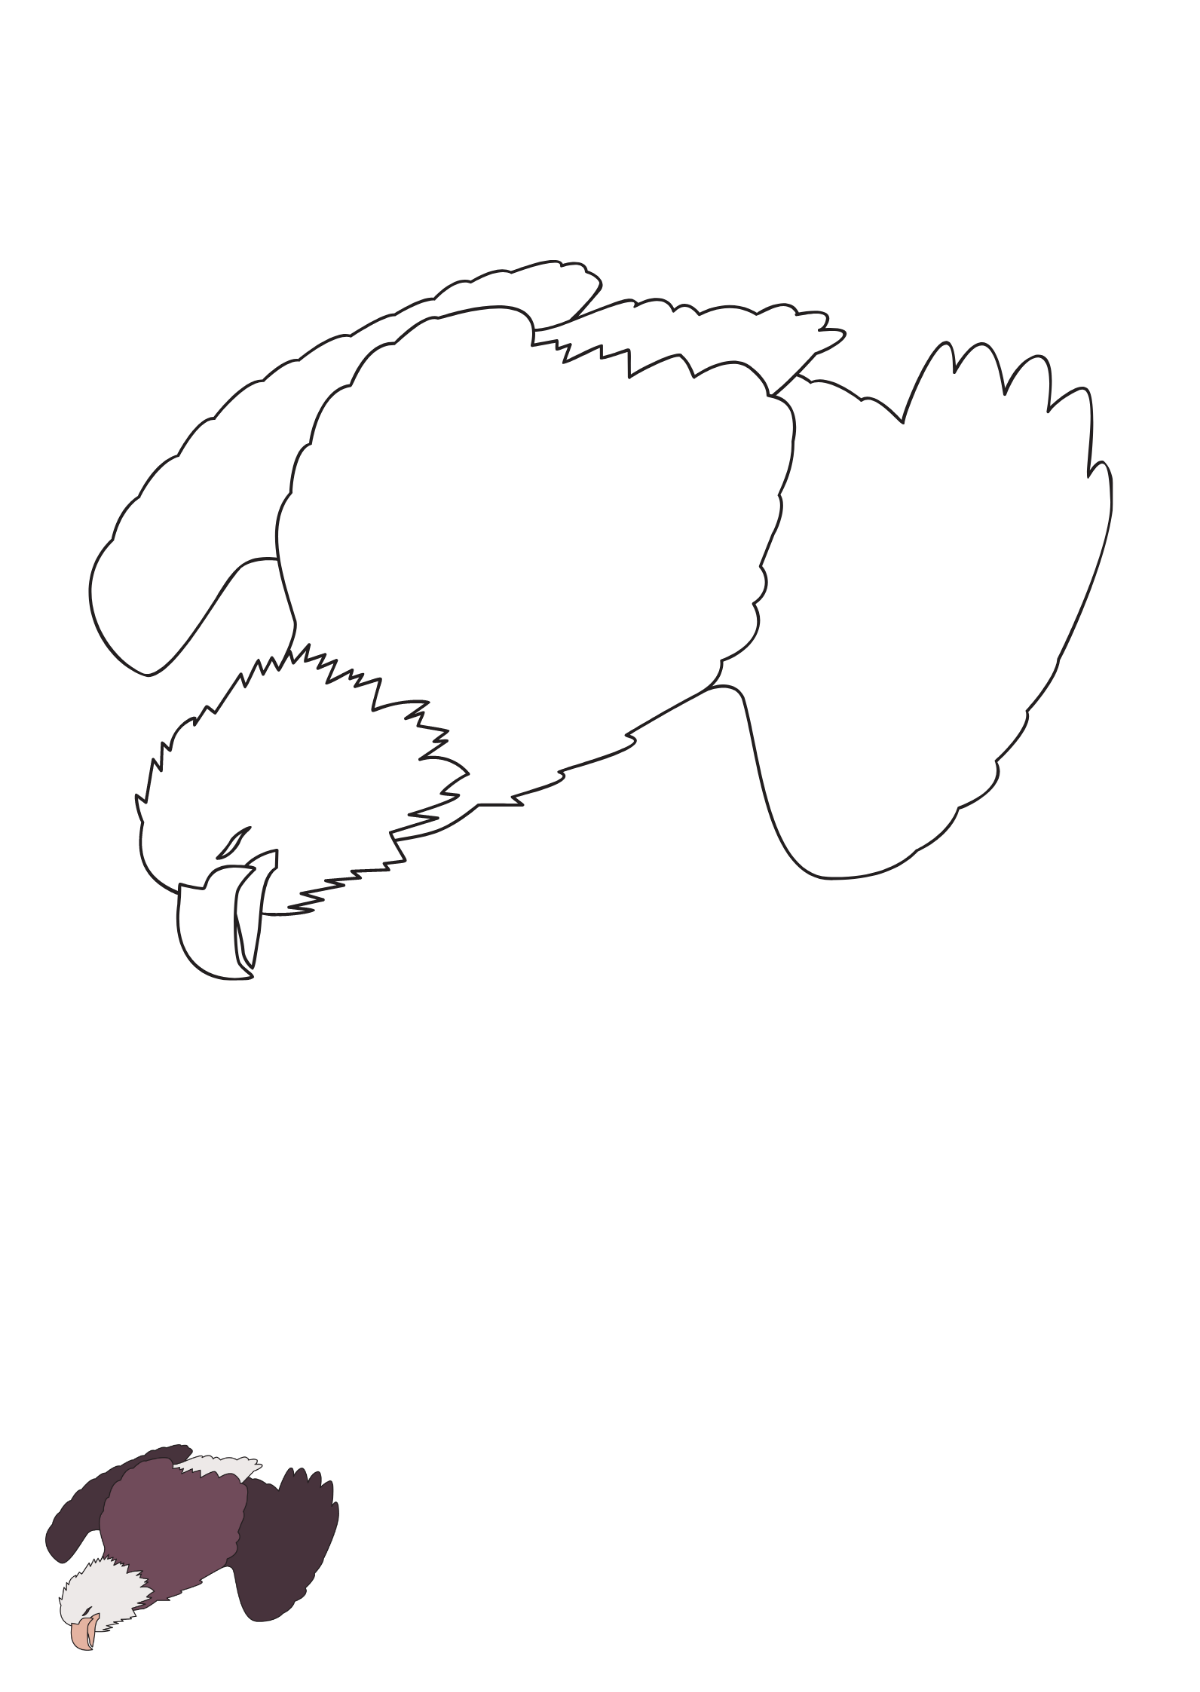 Dead Eagle coloring page Template